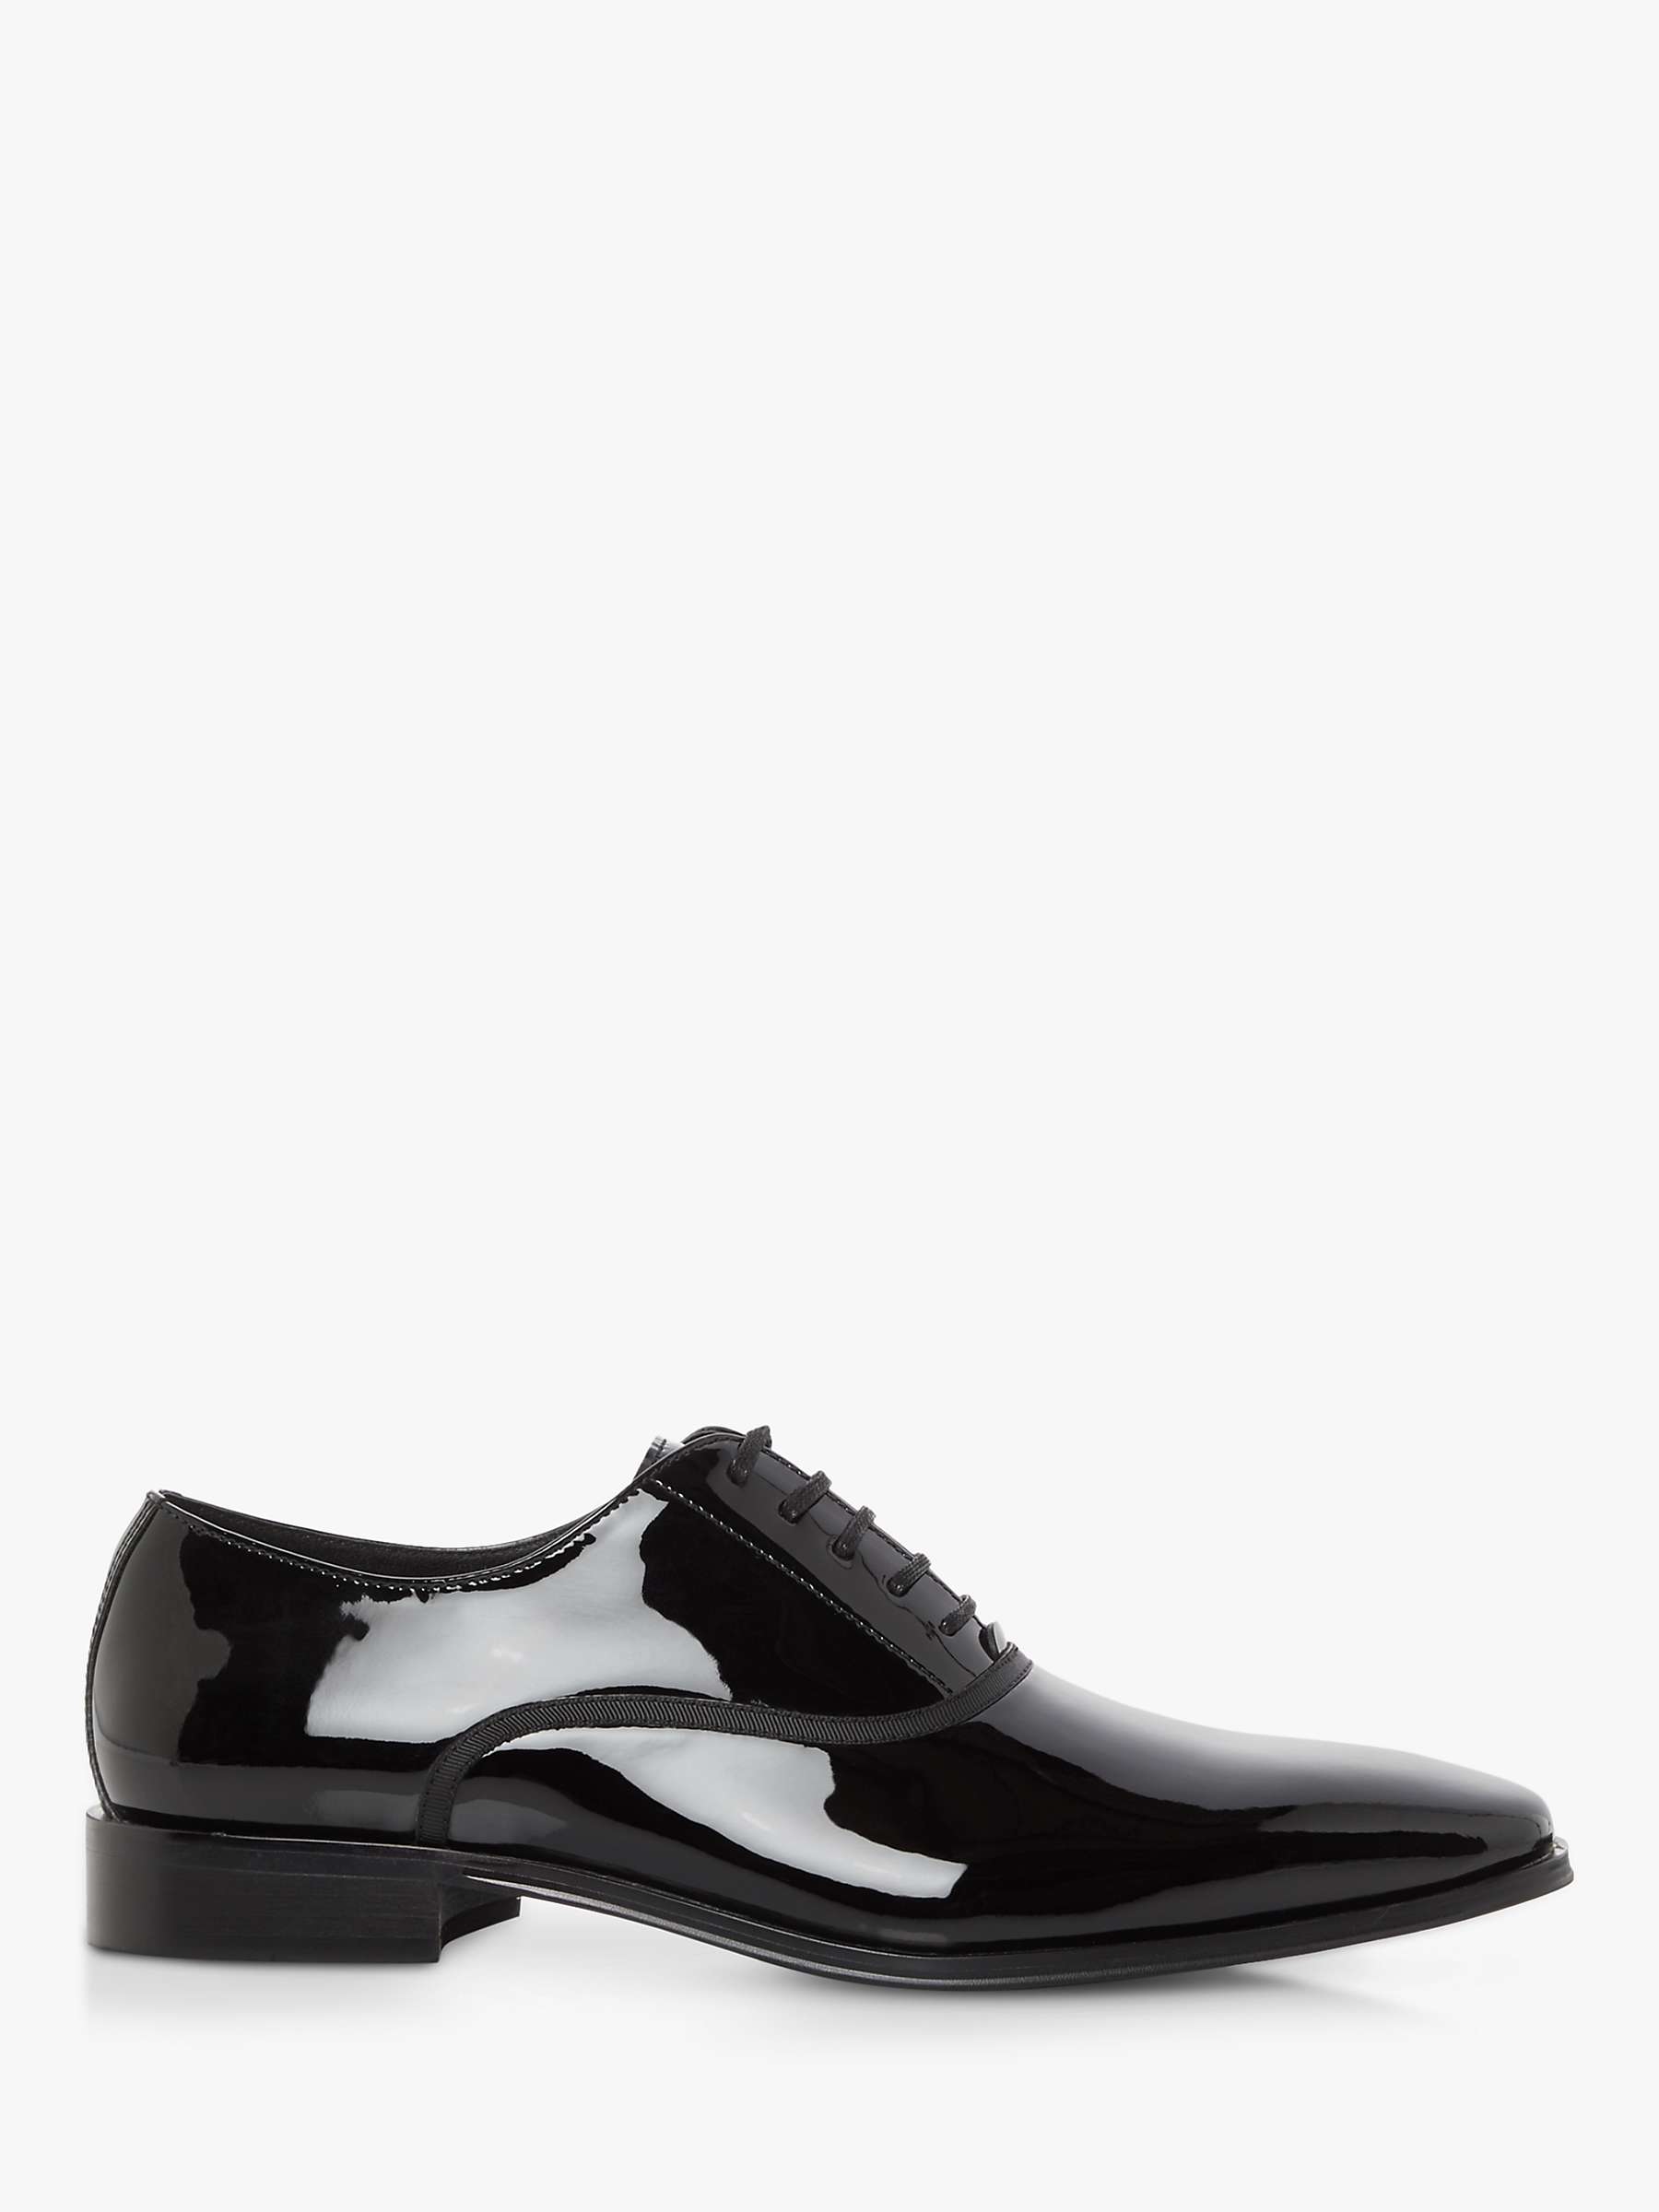 Buy Dune Swan Patent Leather Oxford Shoes, Black Online at johnlewis.com